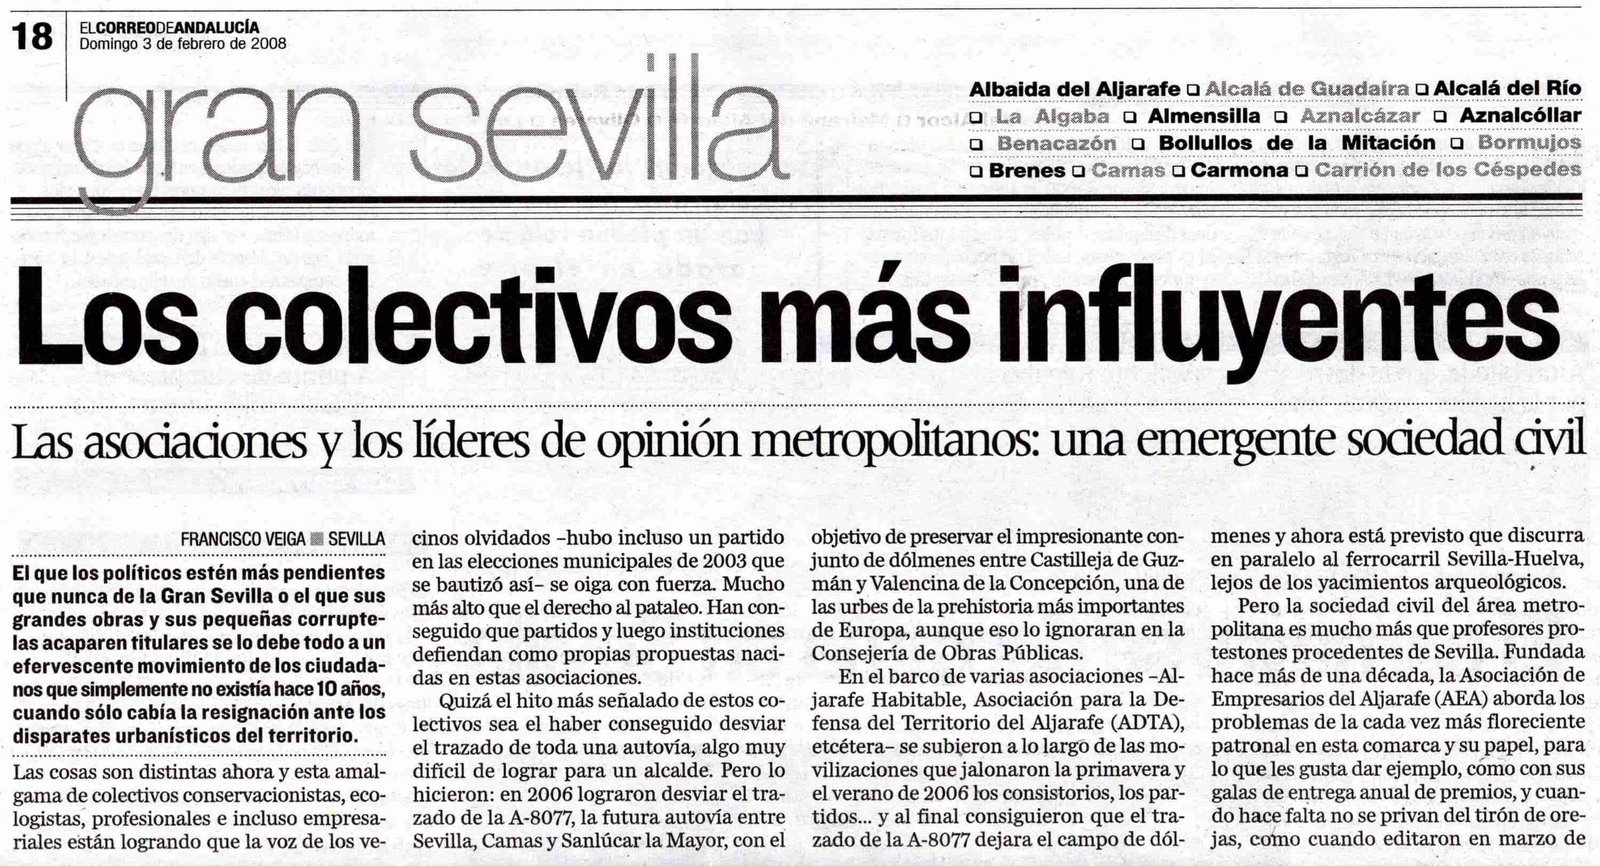 [2008+02+03+CORREO+ANDALUCIA+LOS+COLECTIVOS+MÃ S+INFLUYENTES+(I).jpg]